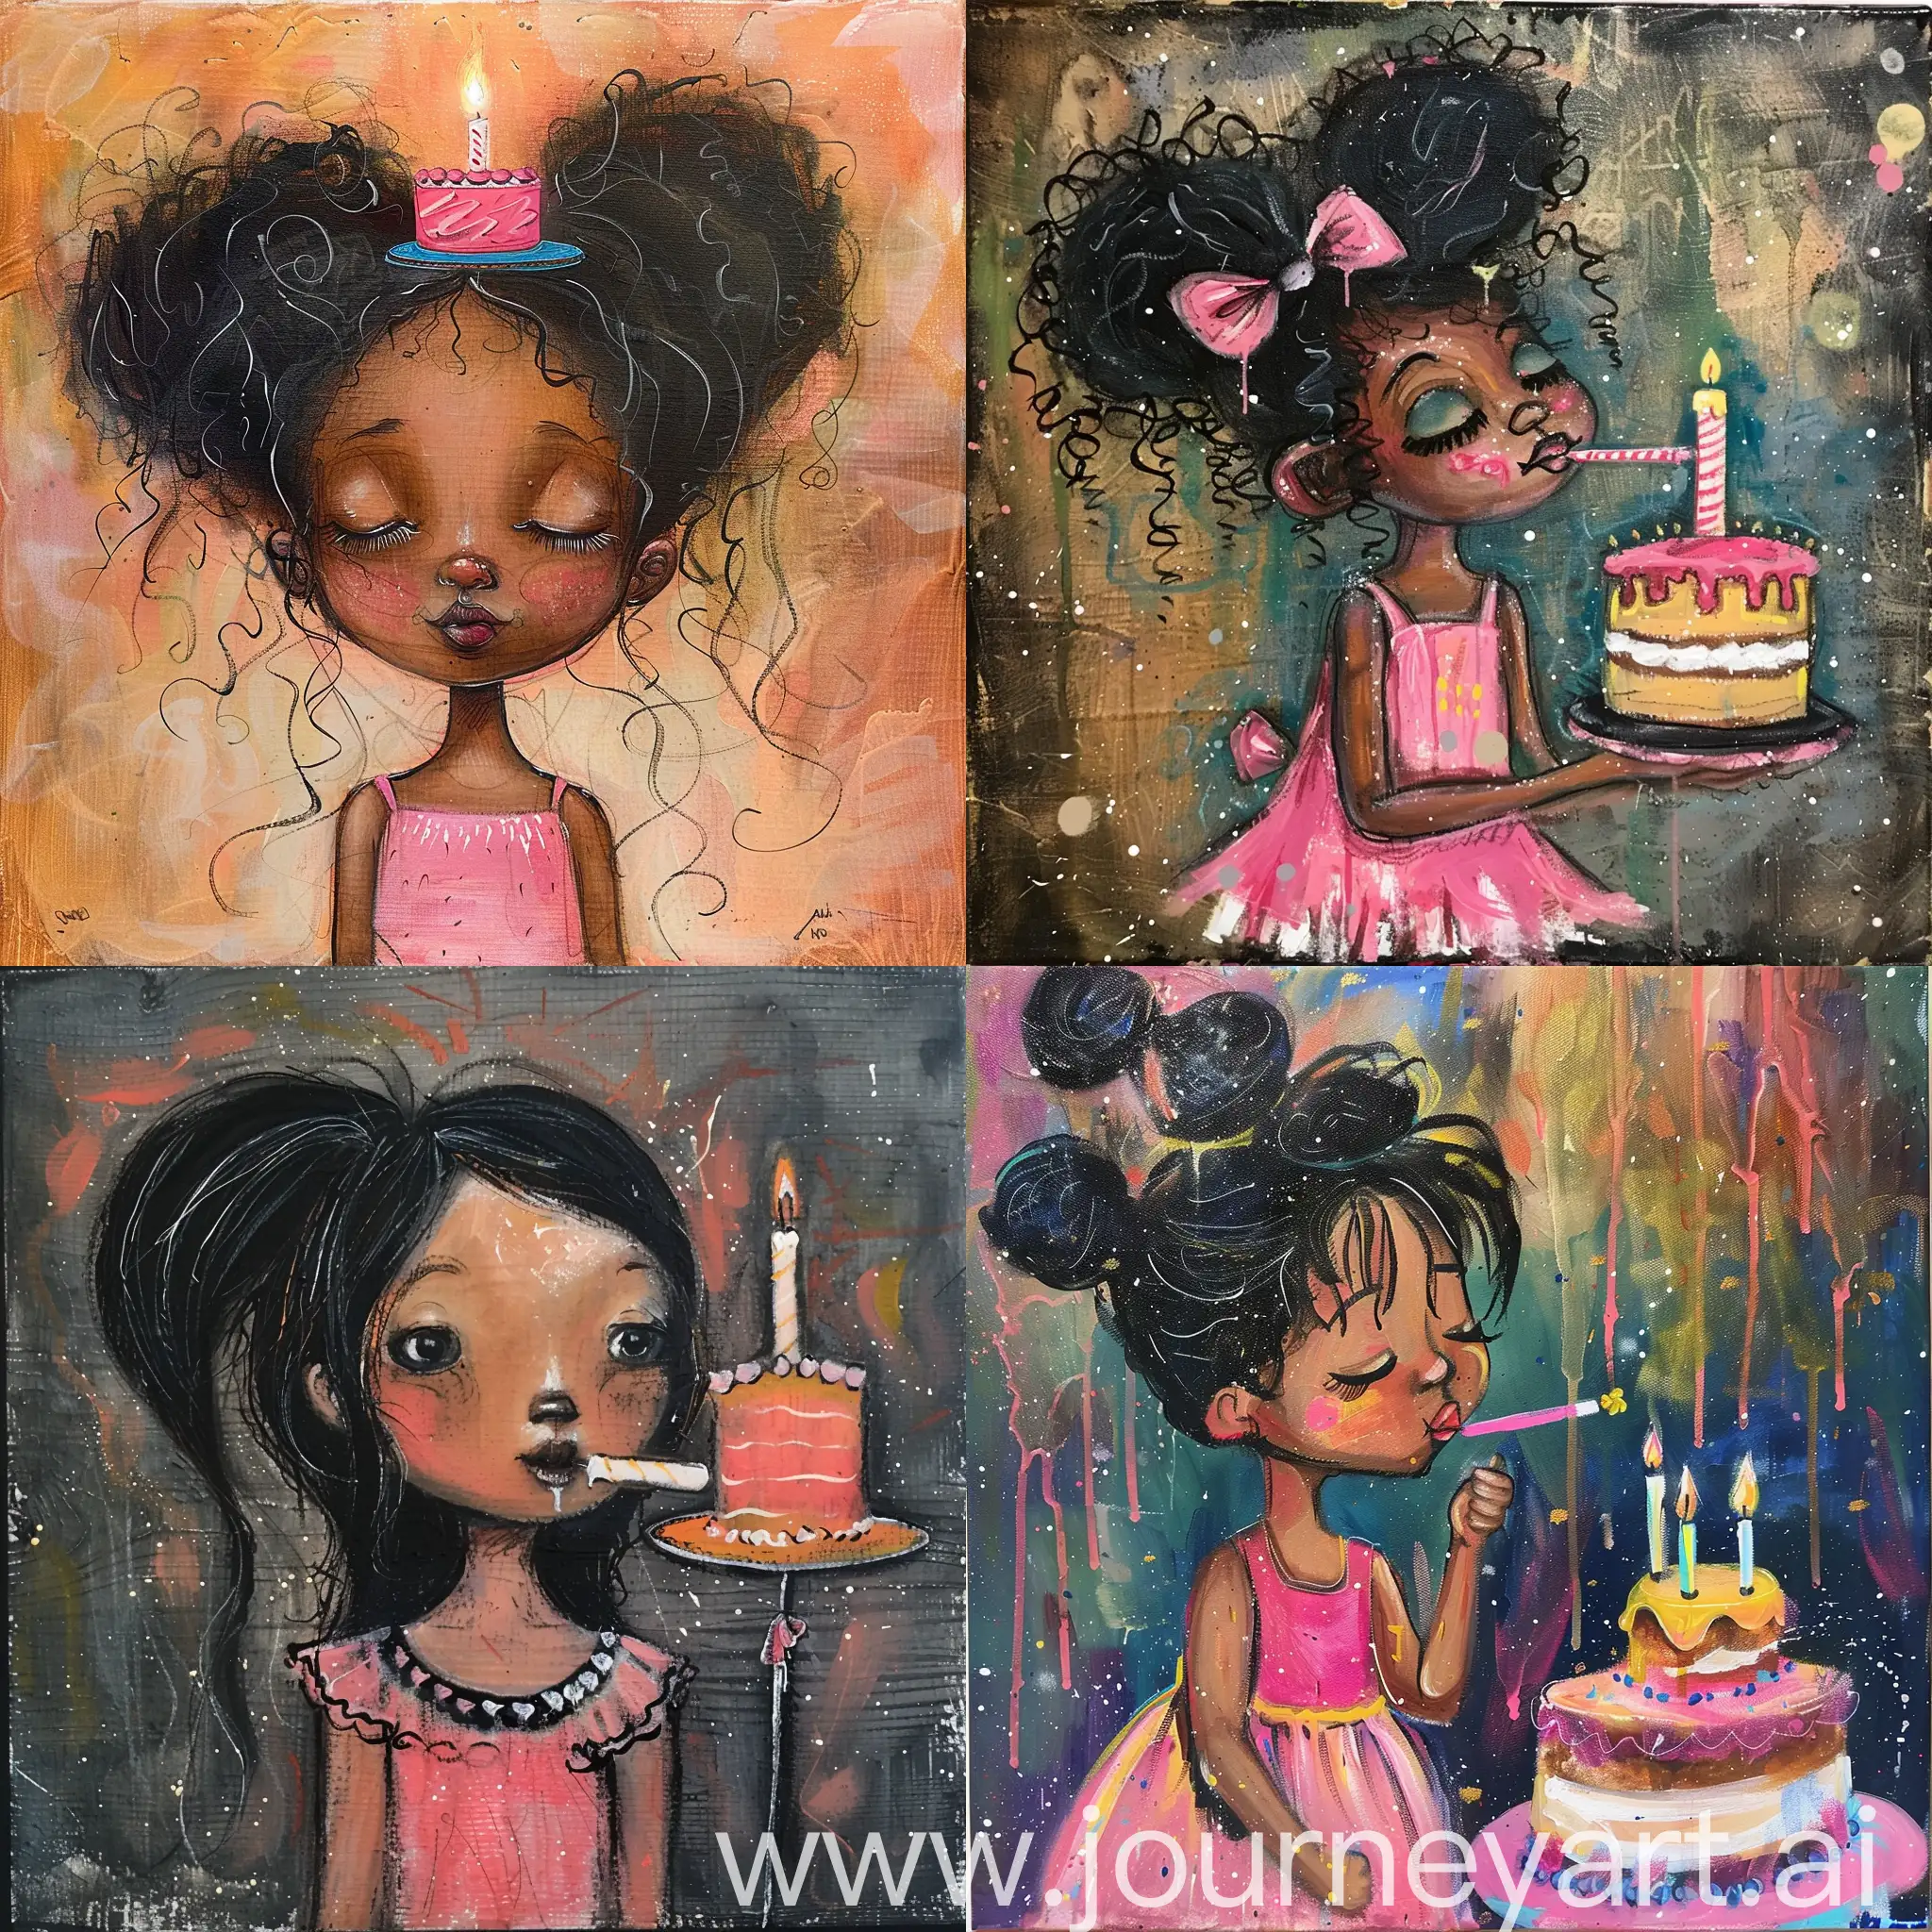 Black-Hair-Girl-in-Pink-Dress-Blowing-Candle-on-Cake-Crayon-Acrylic-Painting